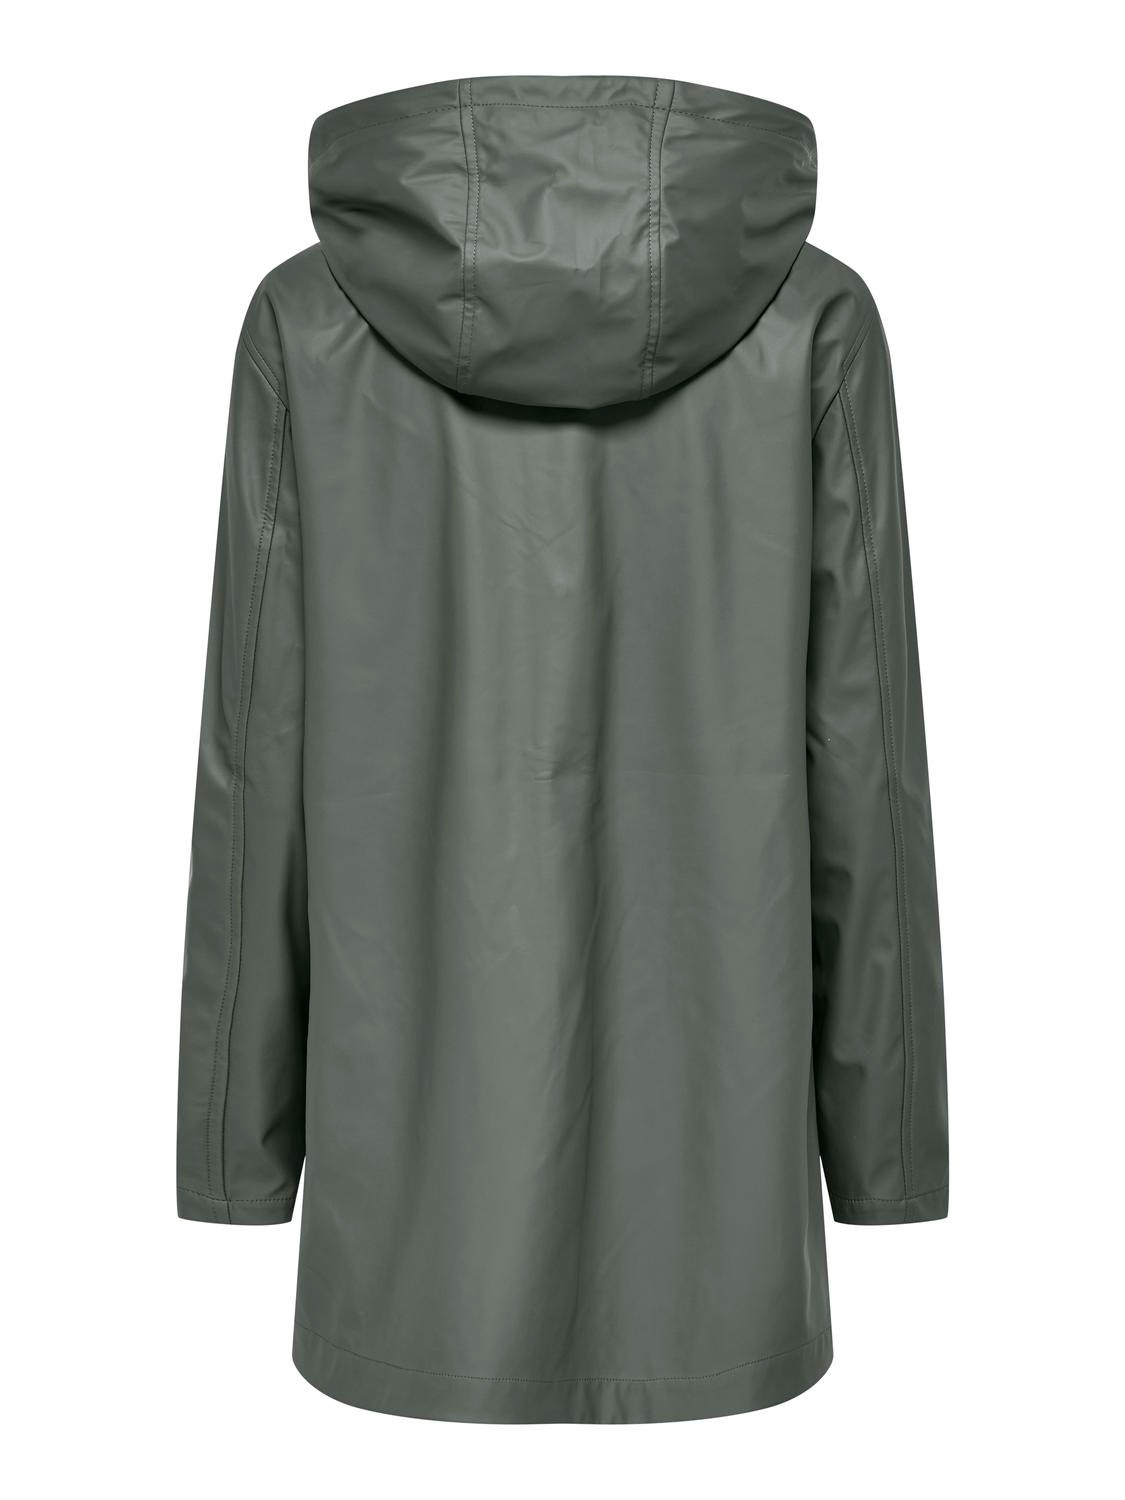 ONLY Hood Coat -Agave Green - 15261734